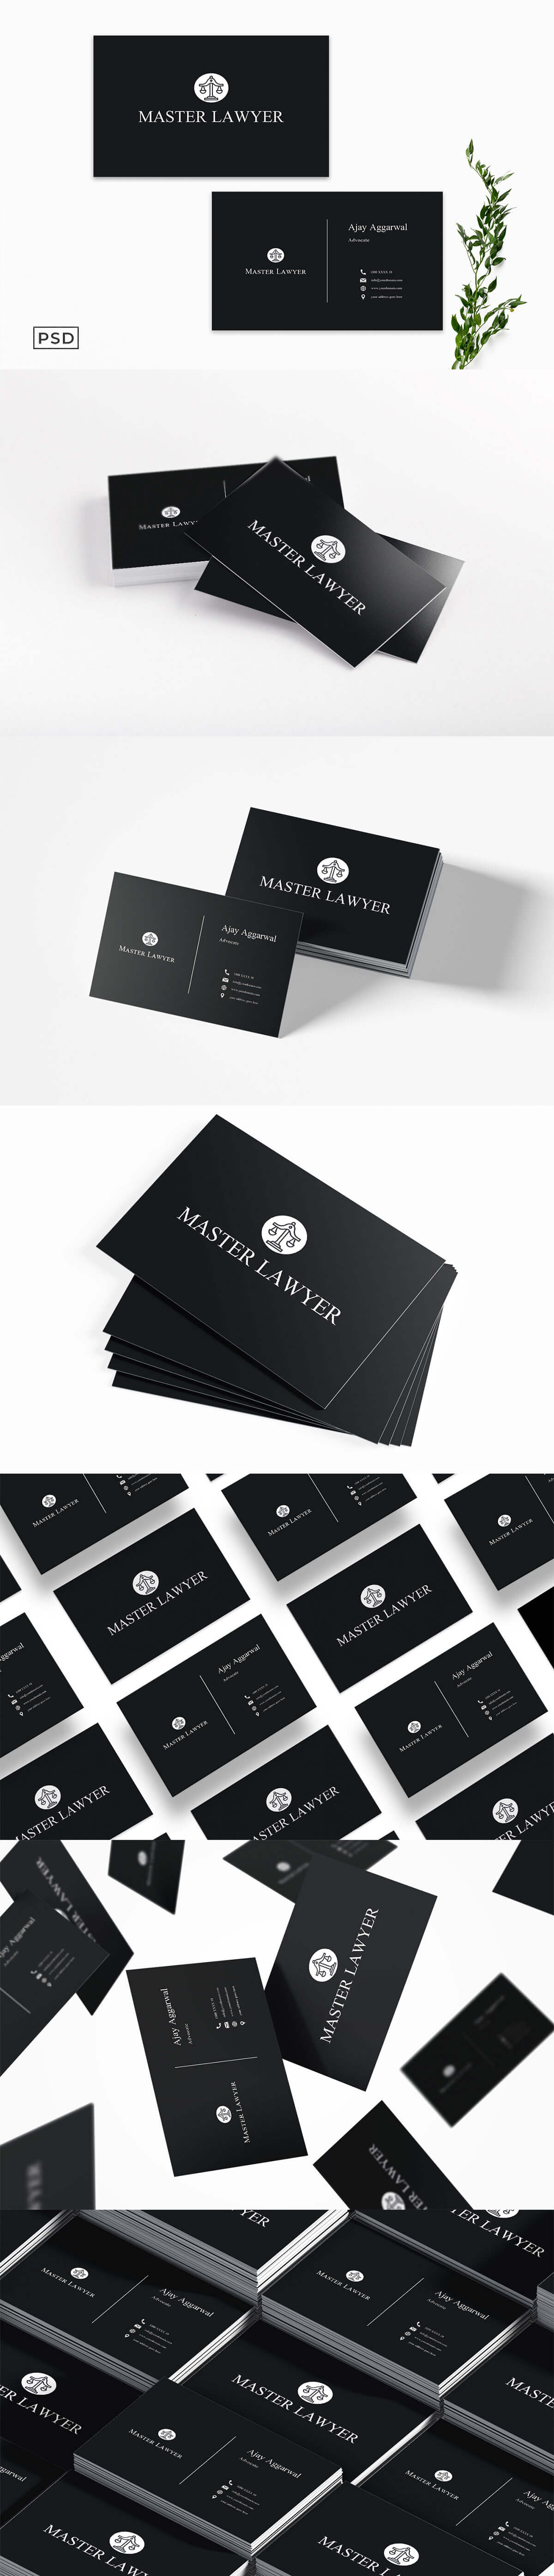 Free Lawyer Business Card Template